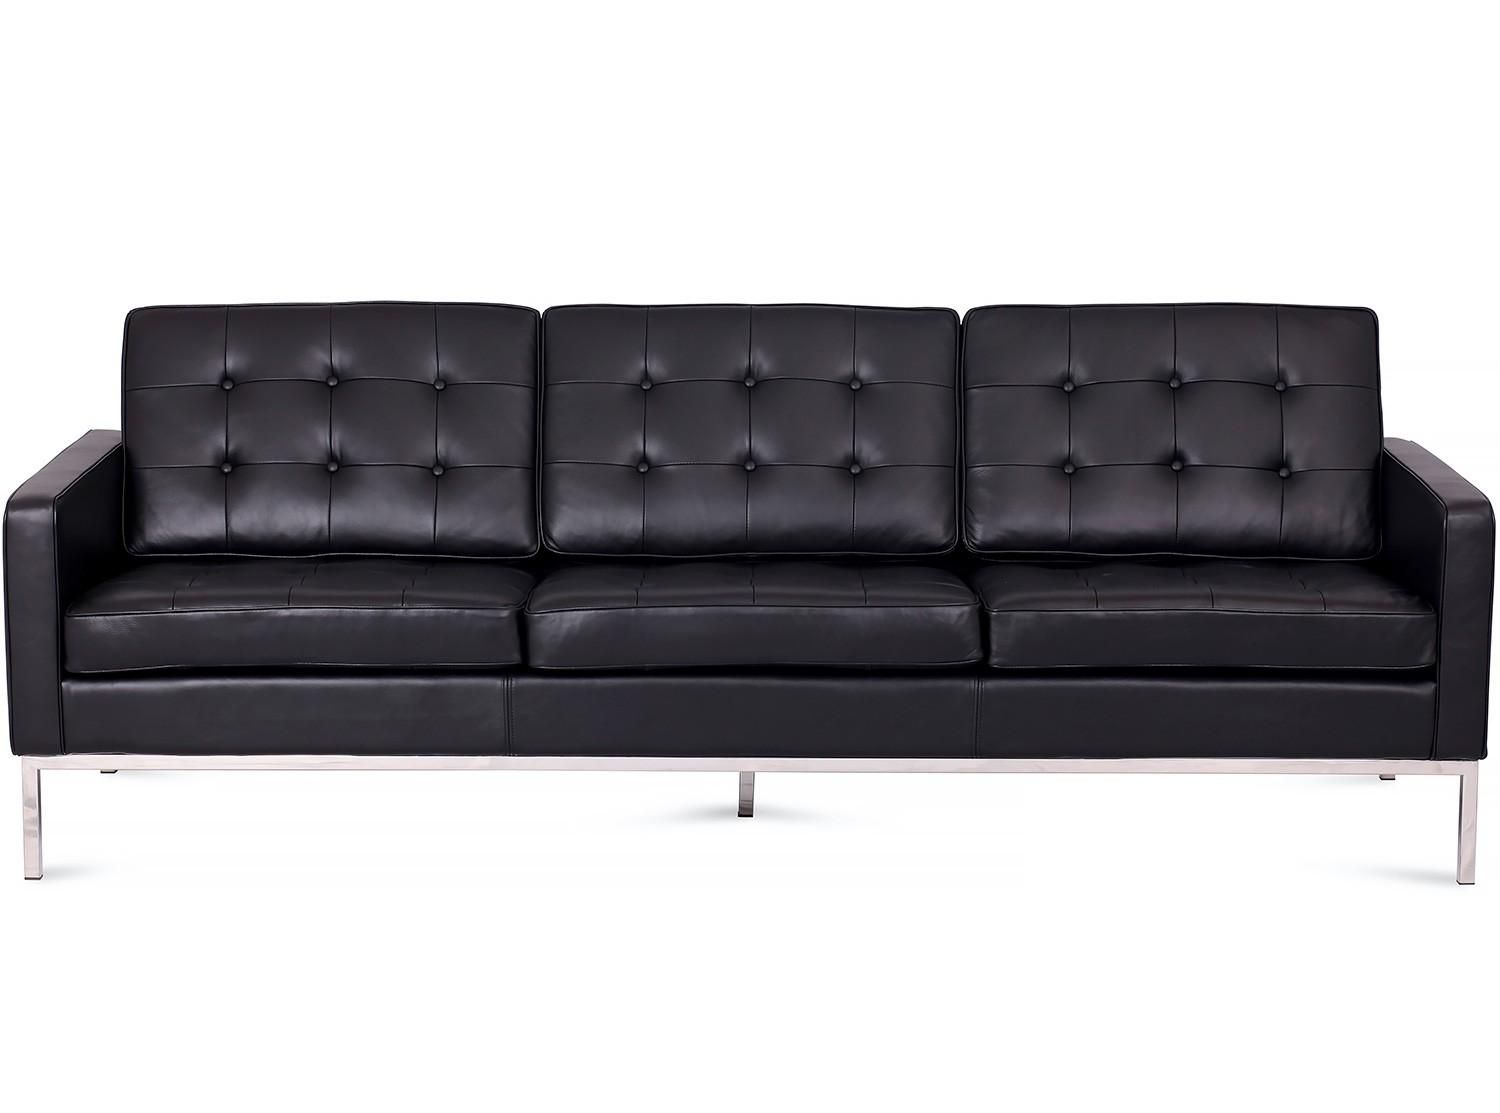 Florence Knoll Sofa 3 Seater Leather (platinum Replica) Throughout Florence Knoll Leather Sofas (View 10 of 20)